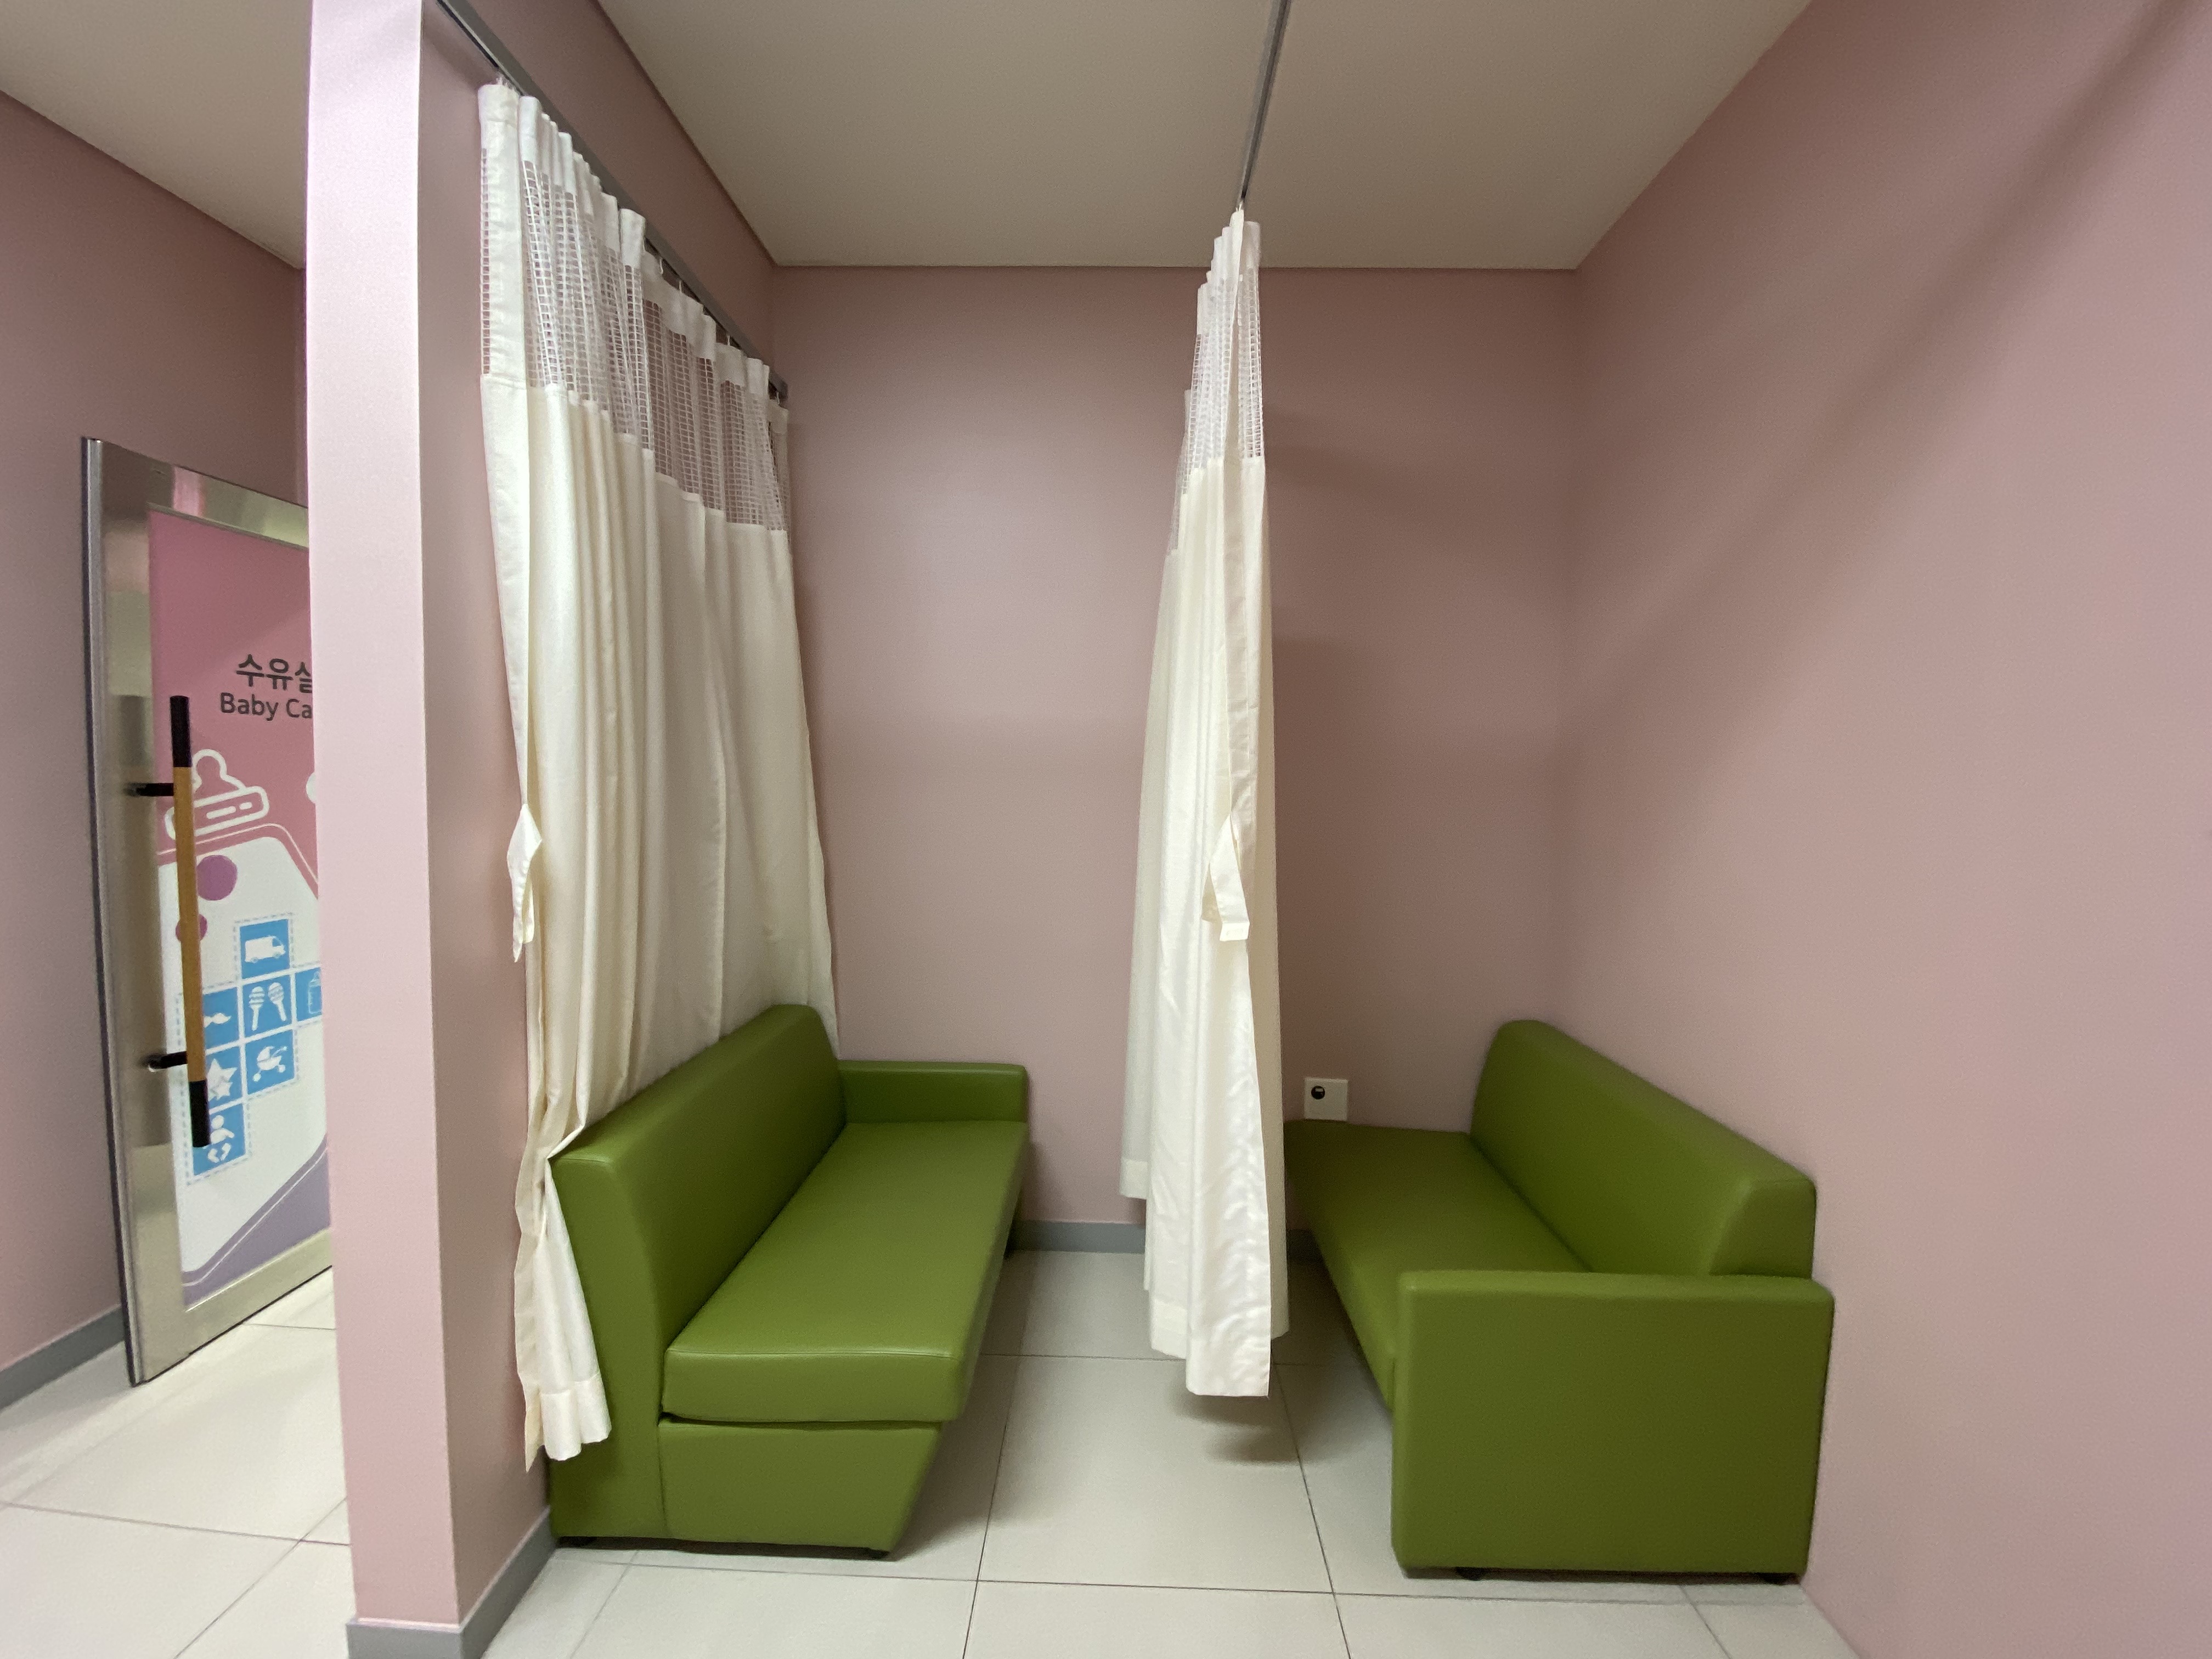 Facilities for pregnant women or family with children0 : Interior view of the nursing room at Children's Science Center that has curtain and wide sofa